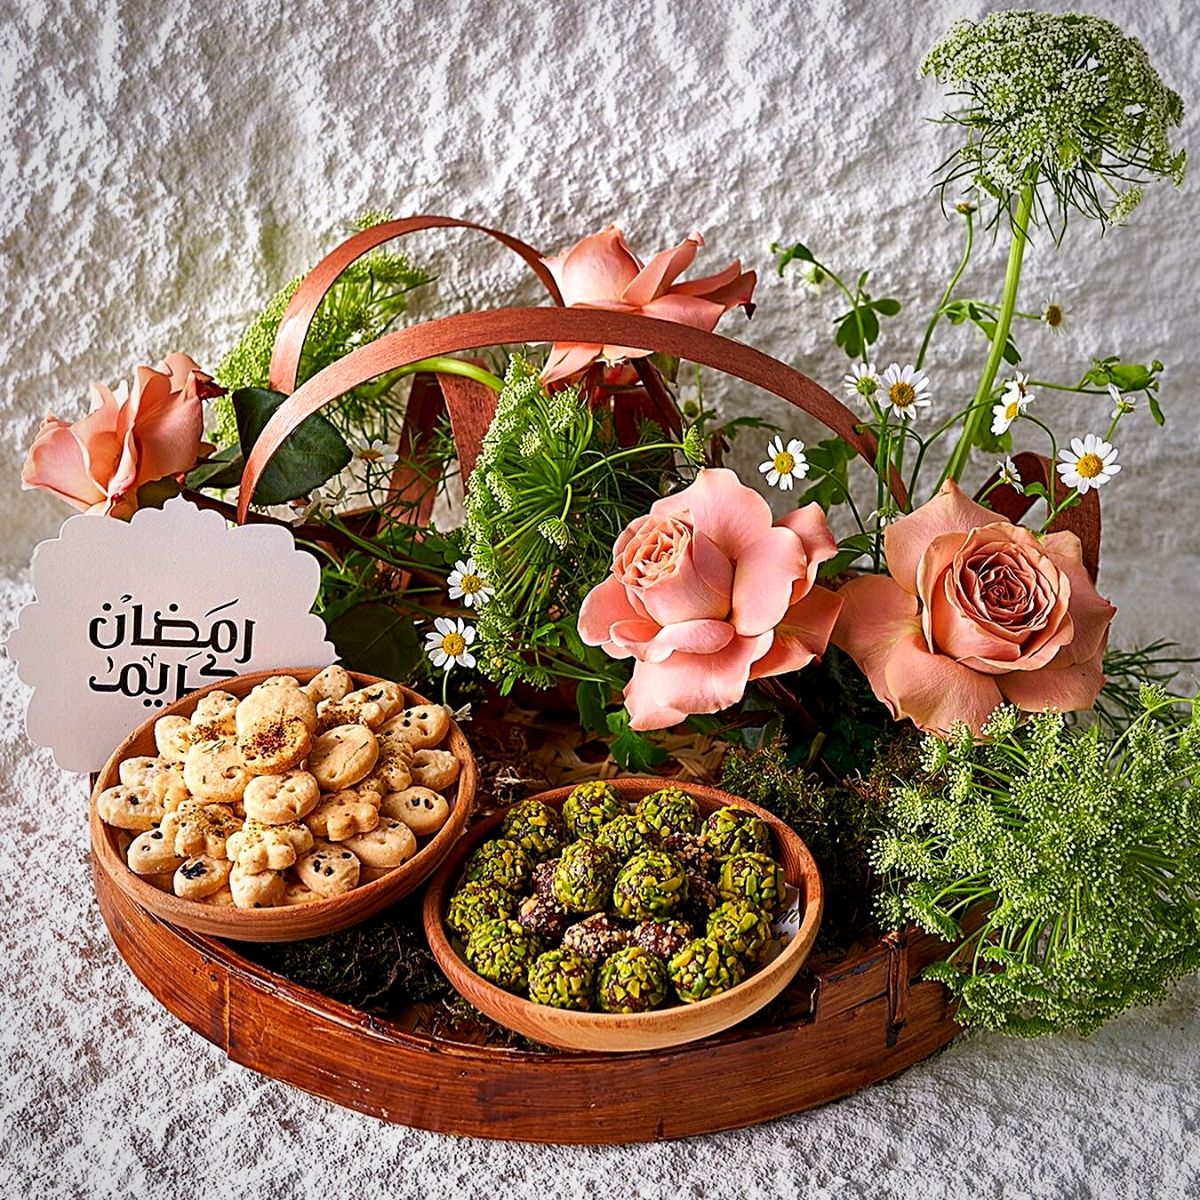 Flowers for the Islamic Holy Month of Ramadan